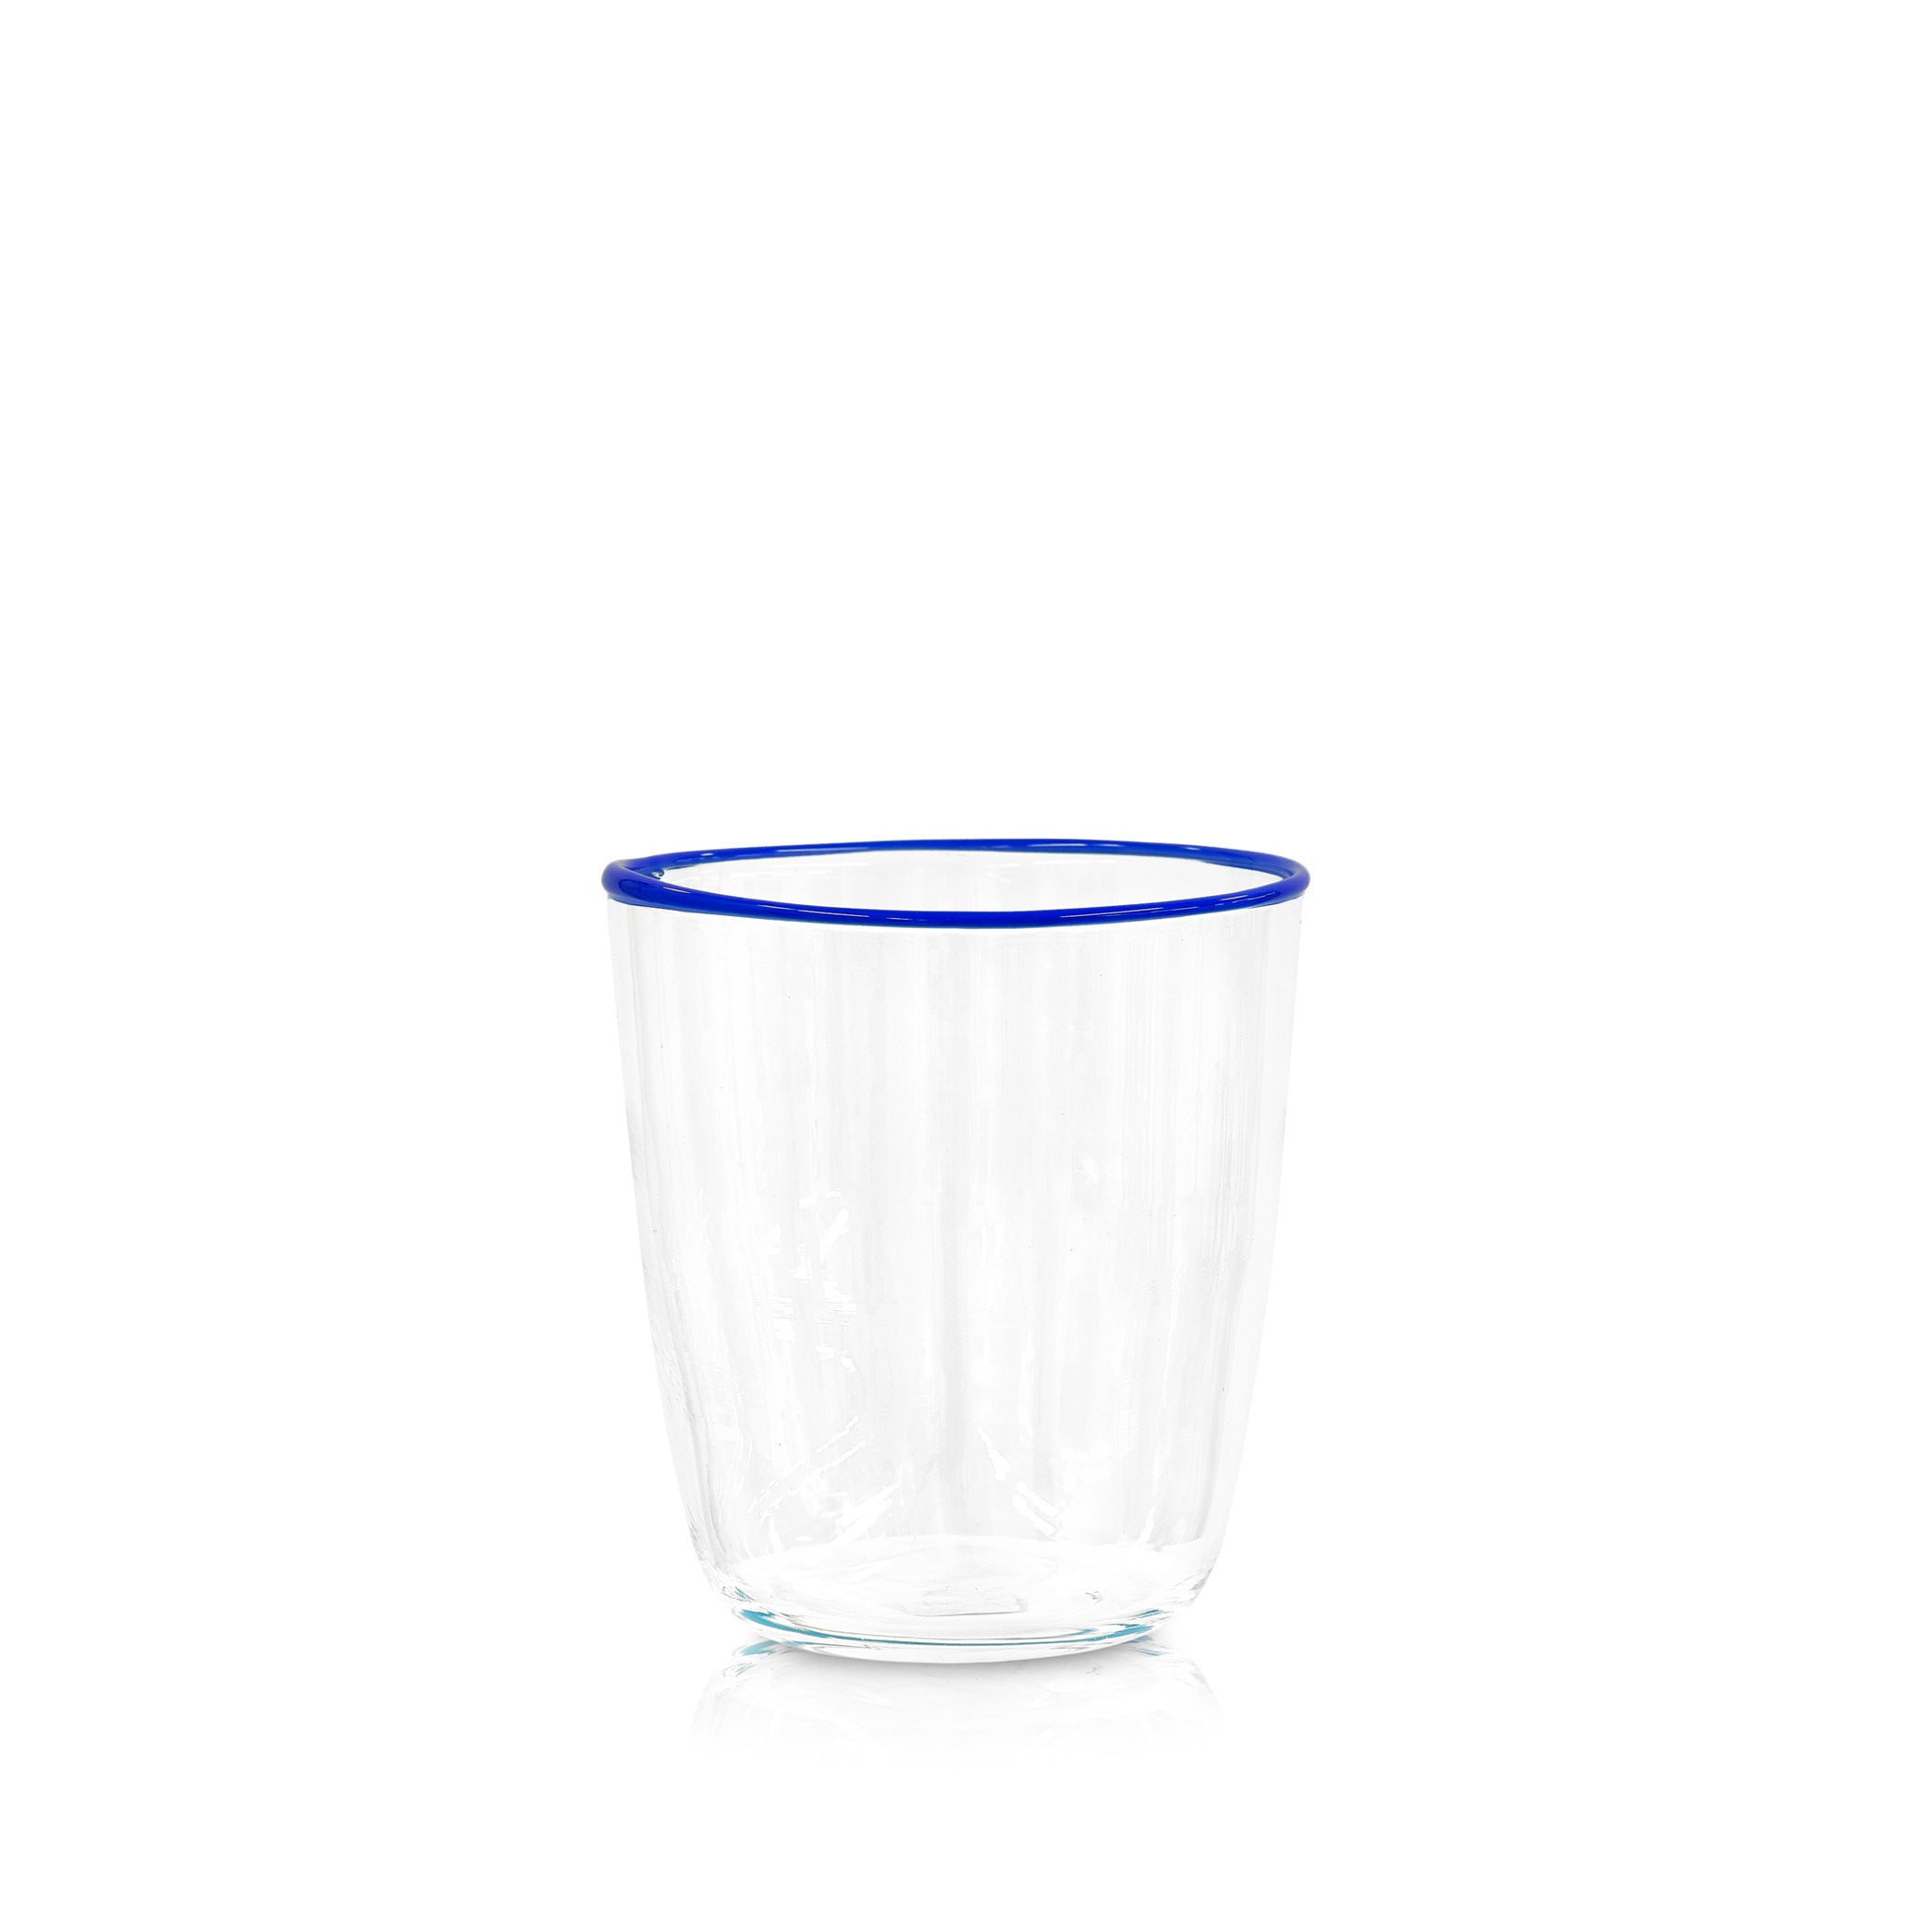 Handblown Clear Bumba Glass with Royal Blue Rim, 30cl